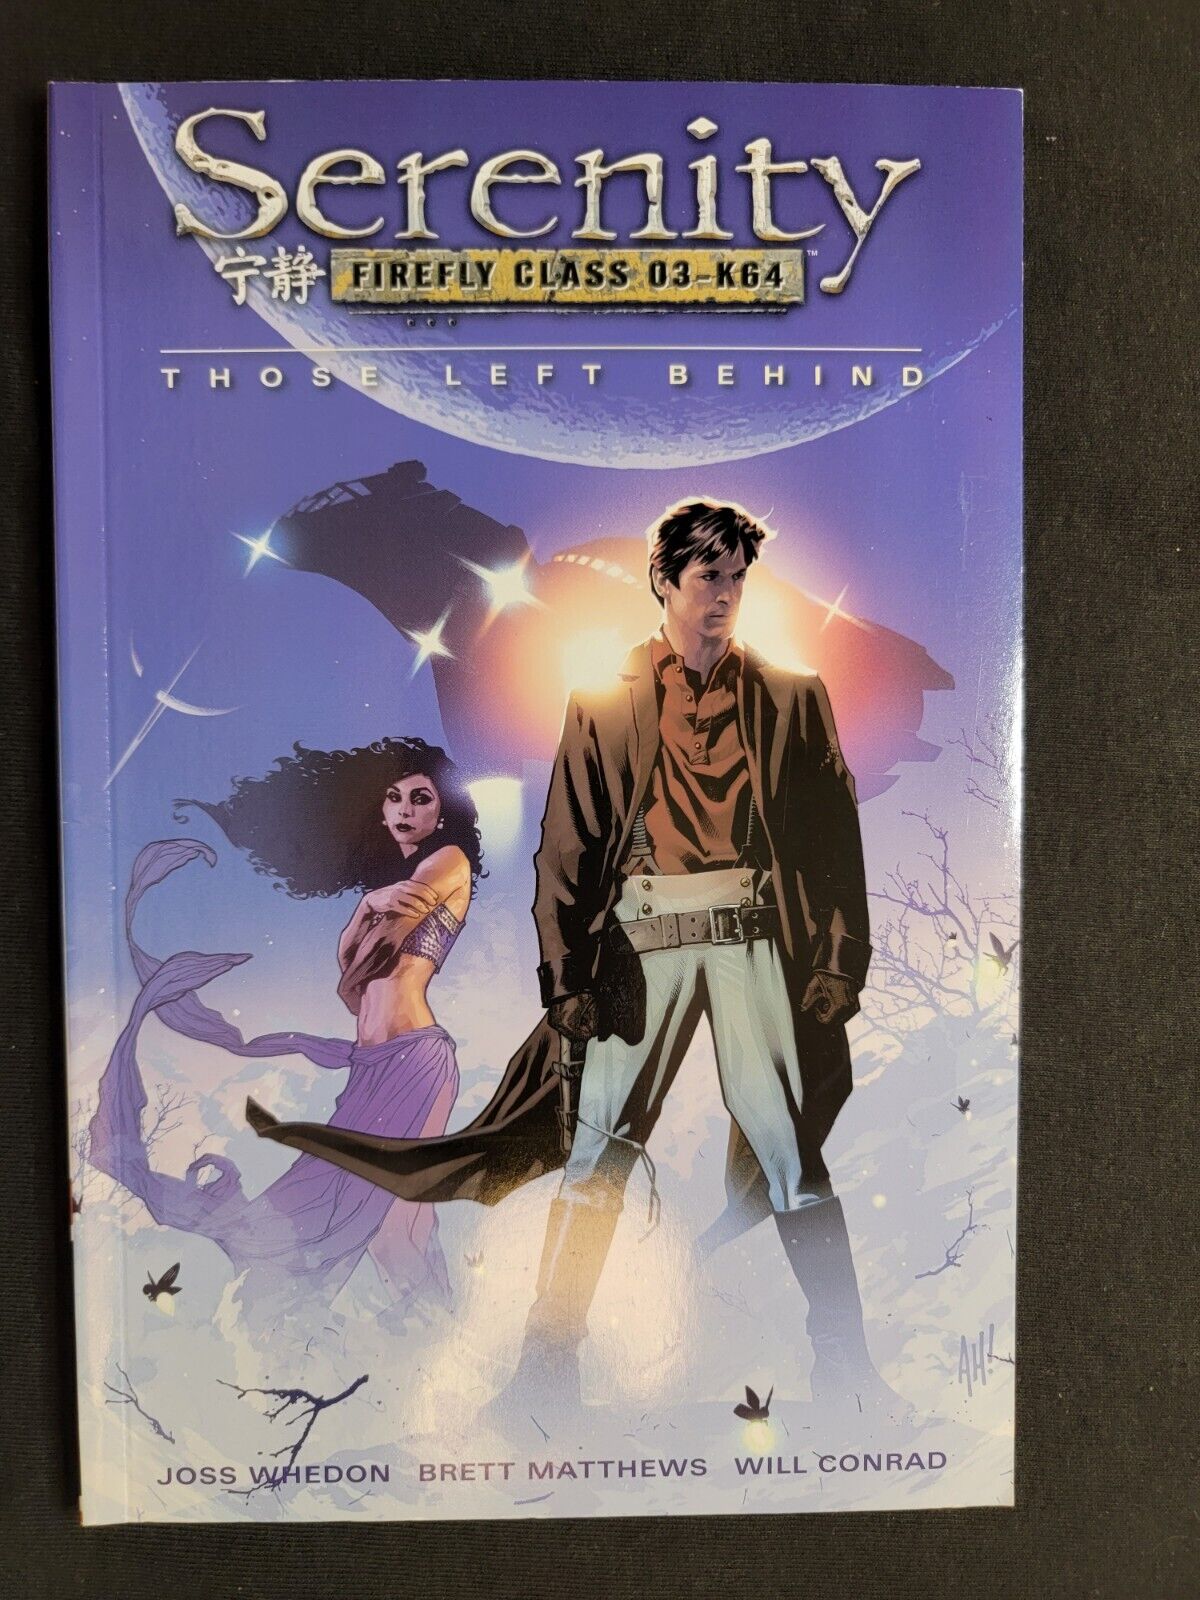 Serenity Firefly Class 03-k64 Those Left Behind (2006) Volume 1 TPB